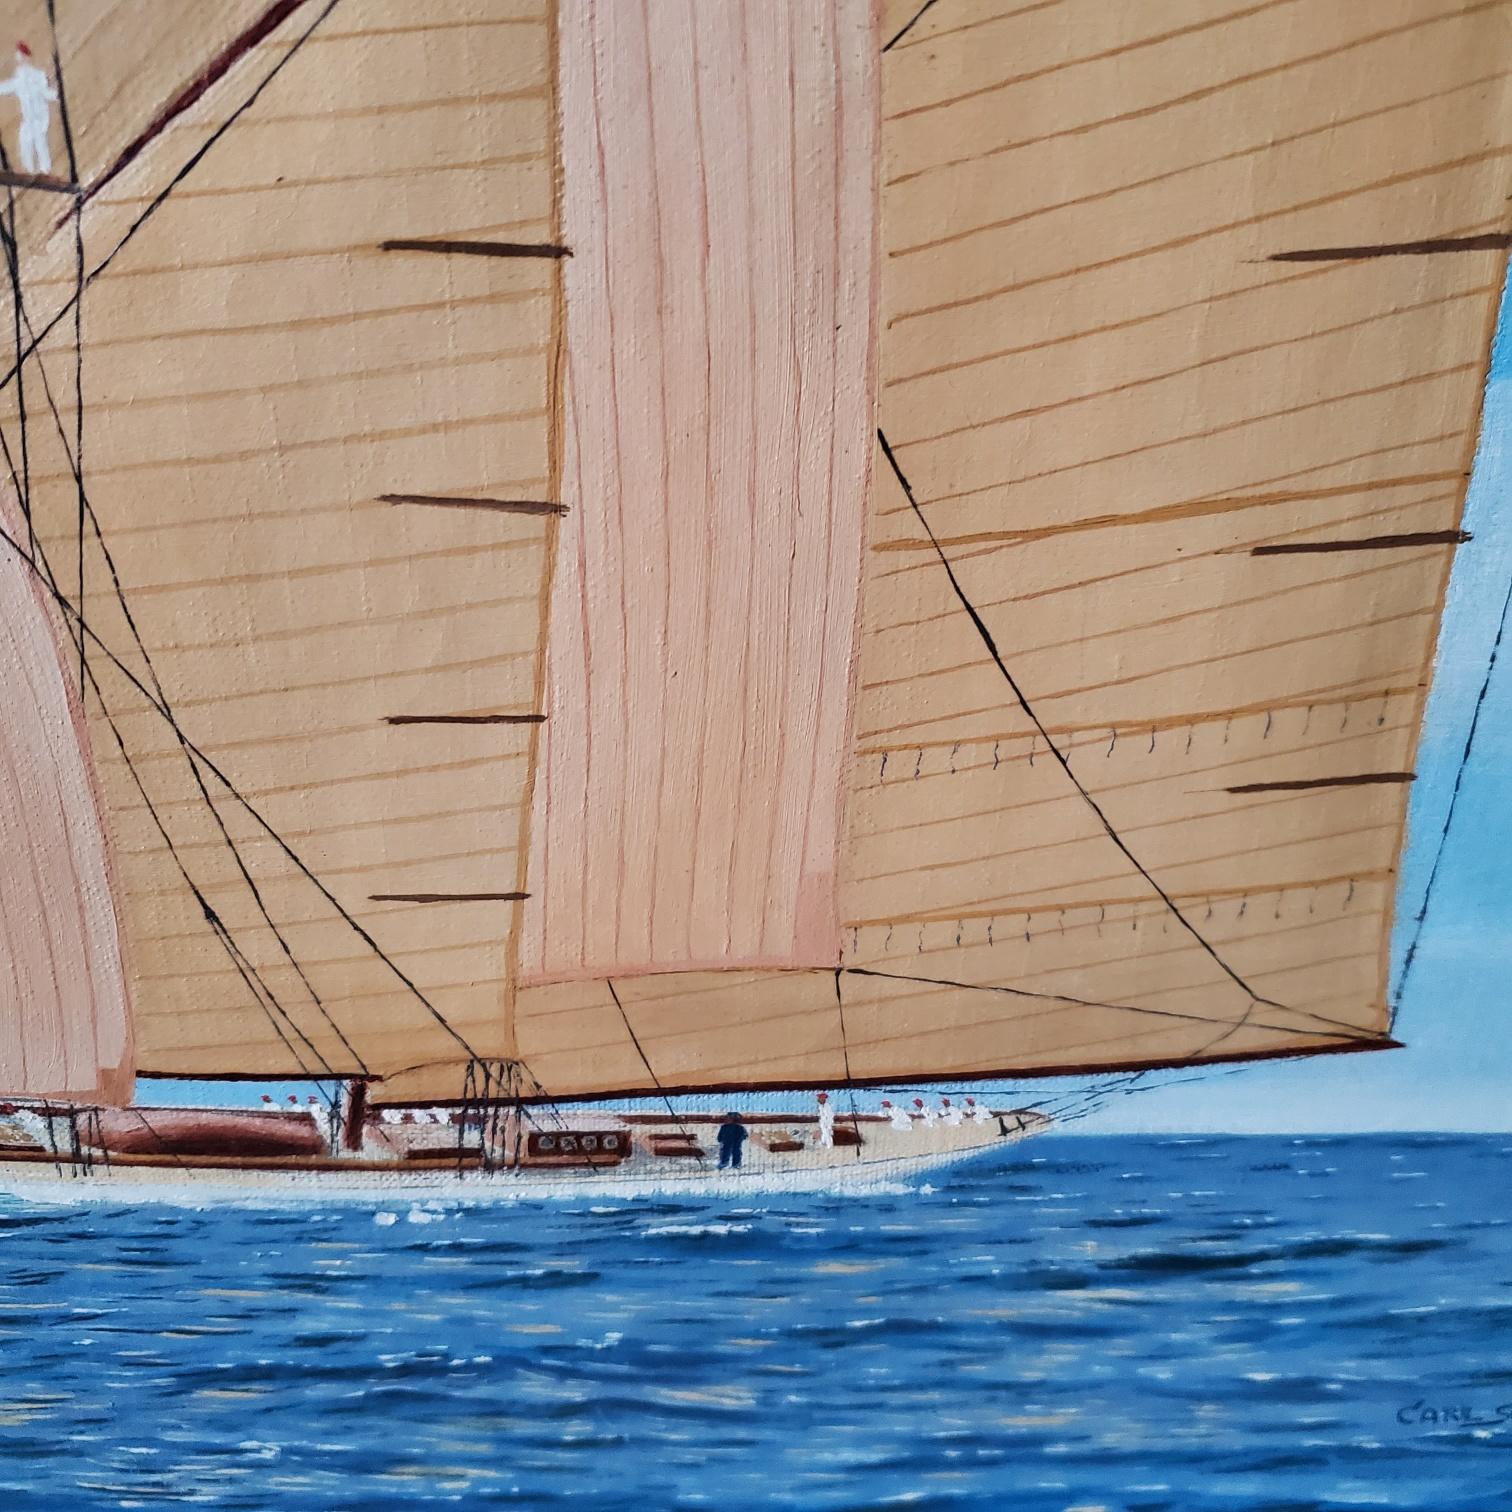 Other Seascape with Portrait of a Schooner-Rigged Yacht, Signed and Dated 1937 For Sale